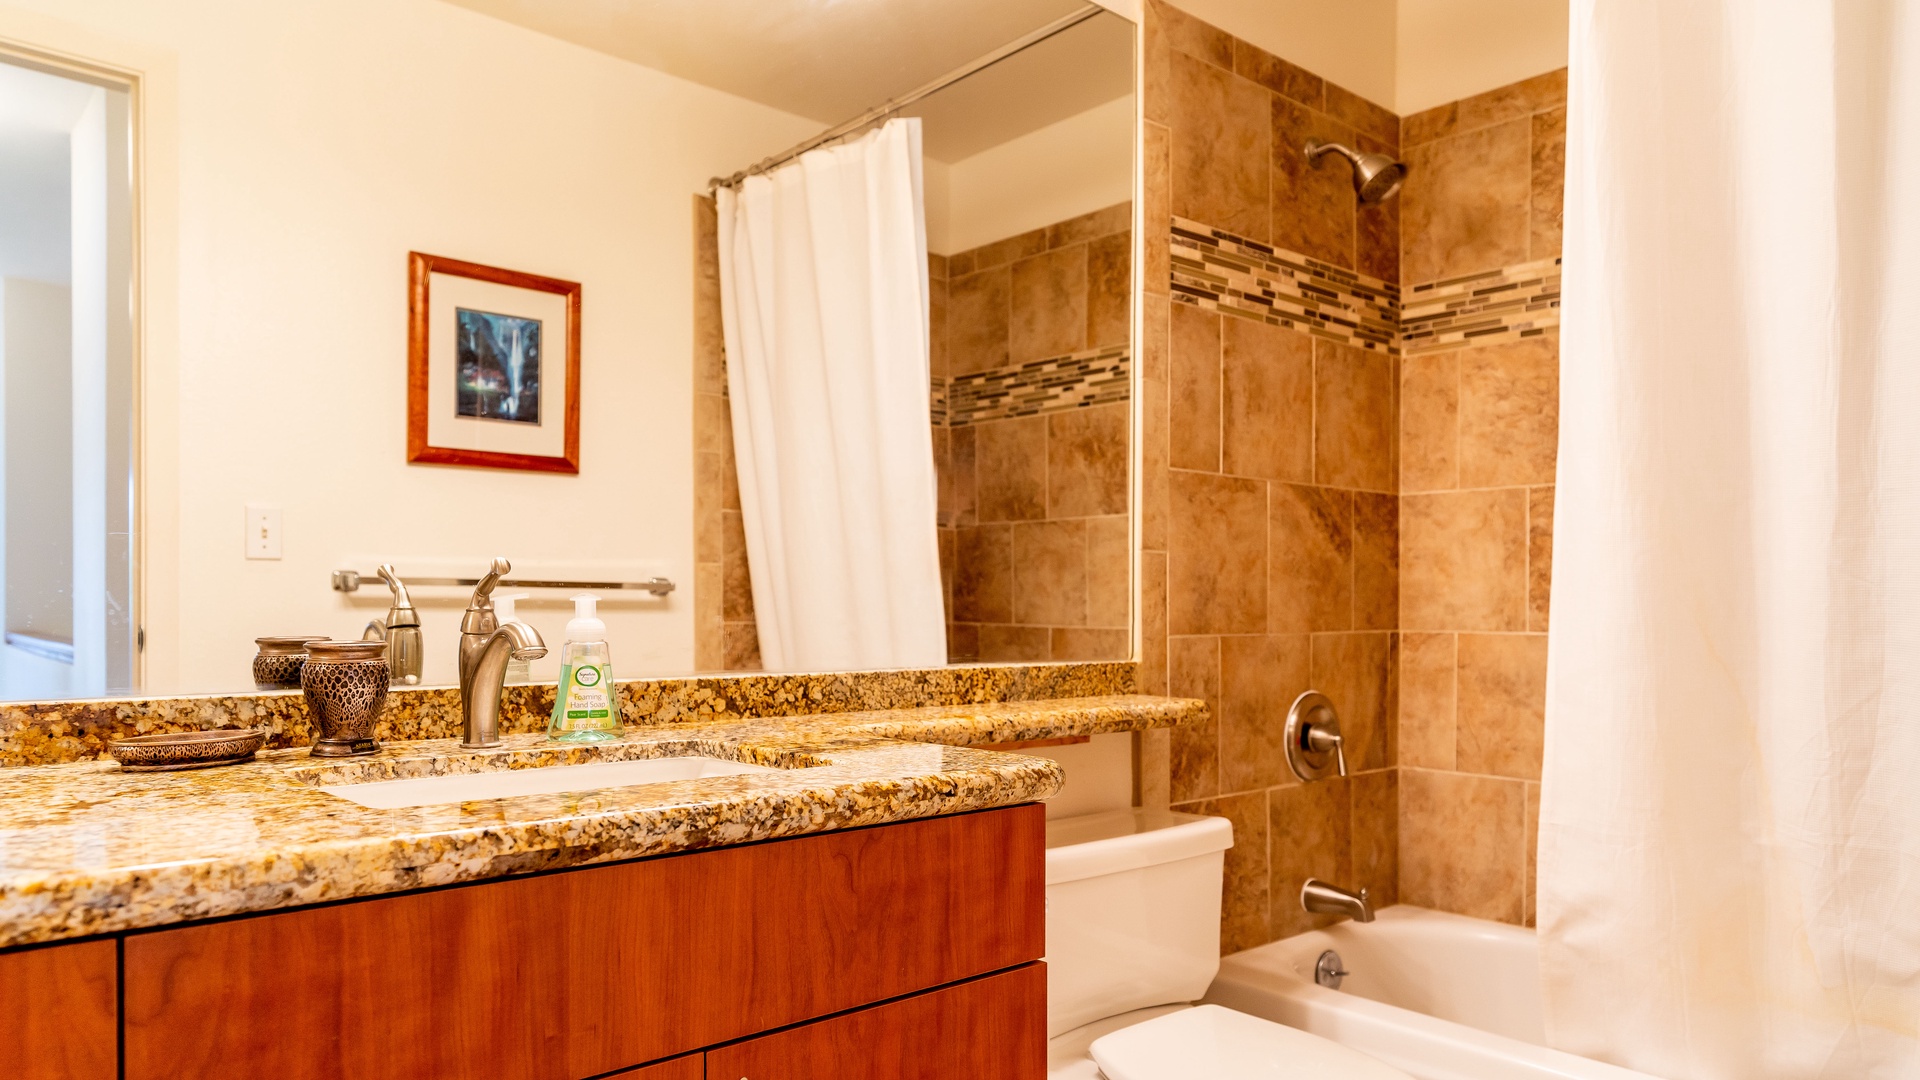 Kapolei Vacation Rentals, Fairways at Ko Olina 20G - The grand primary guest bathroom with a shower and bathtub.